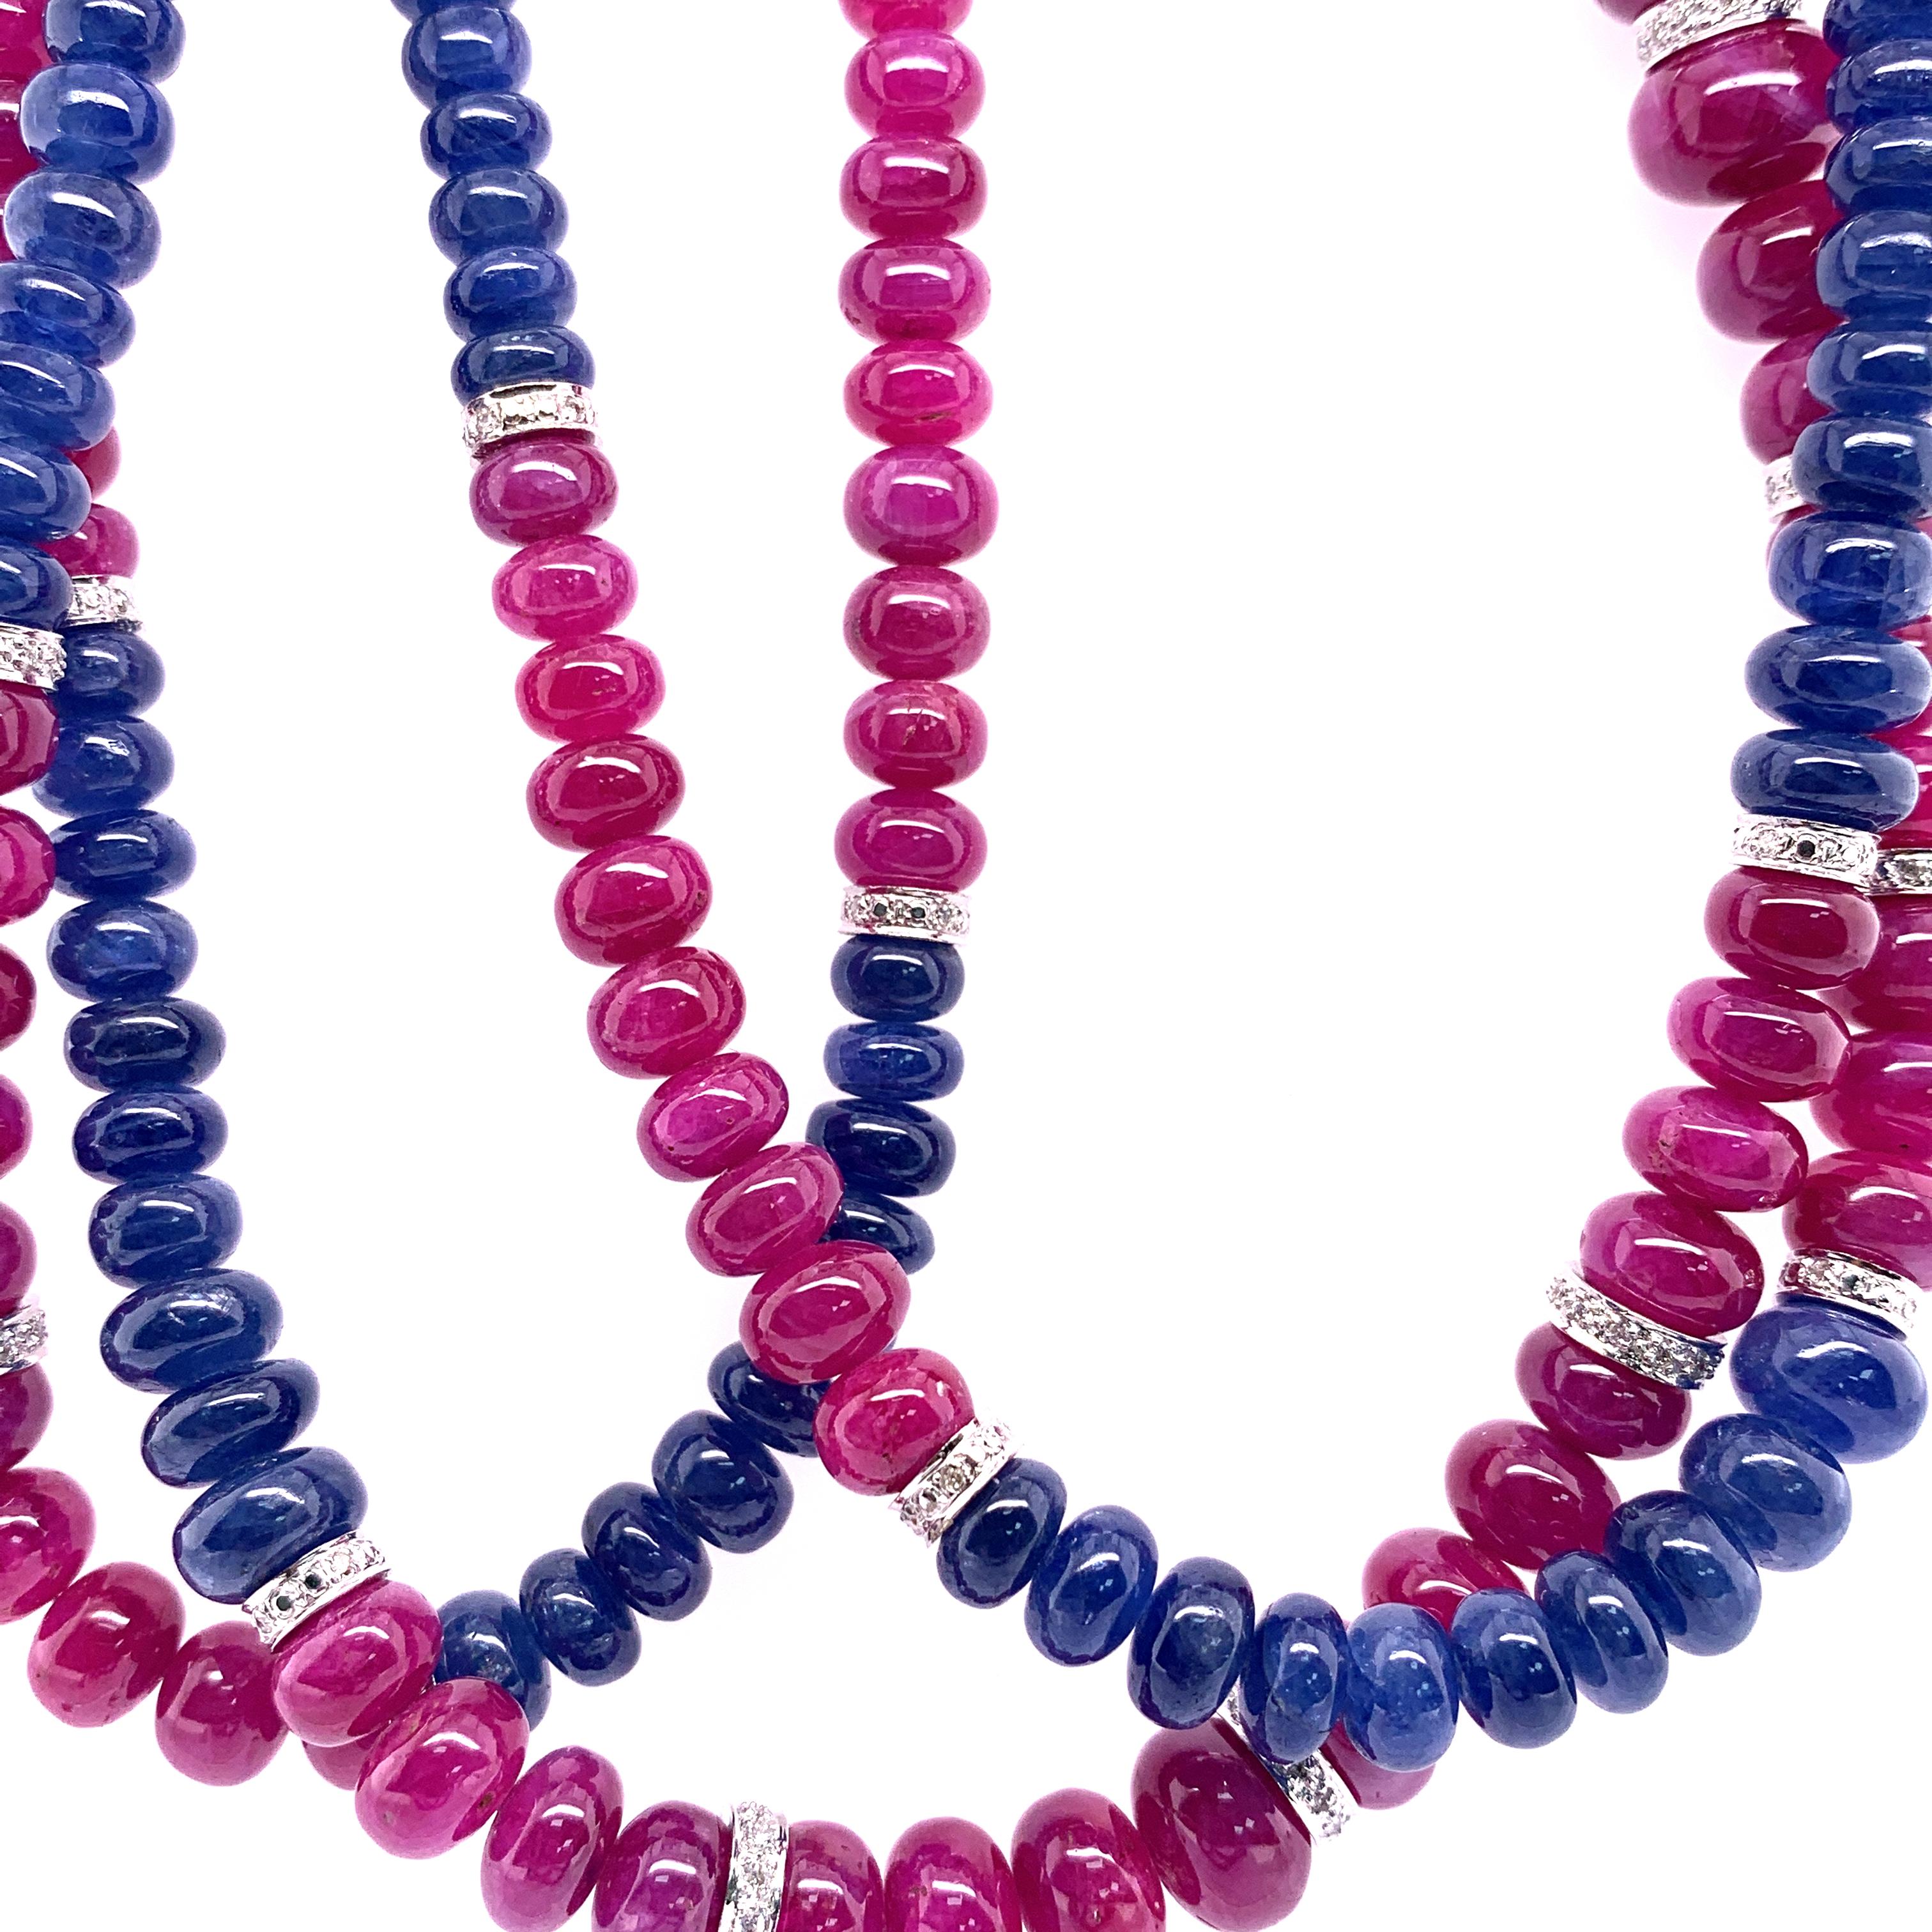 Burmese Unheated Ruby and Sapphire Beads White Diamond Gold Necklace:

A beautiful necklace, it features luscious unheated Burmese ruby and blue sapphire beads weighing 567.37 carat and 555.51 carat respectively, with 57 white round brilliant